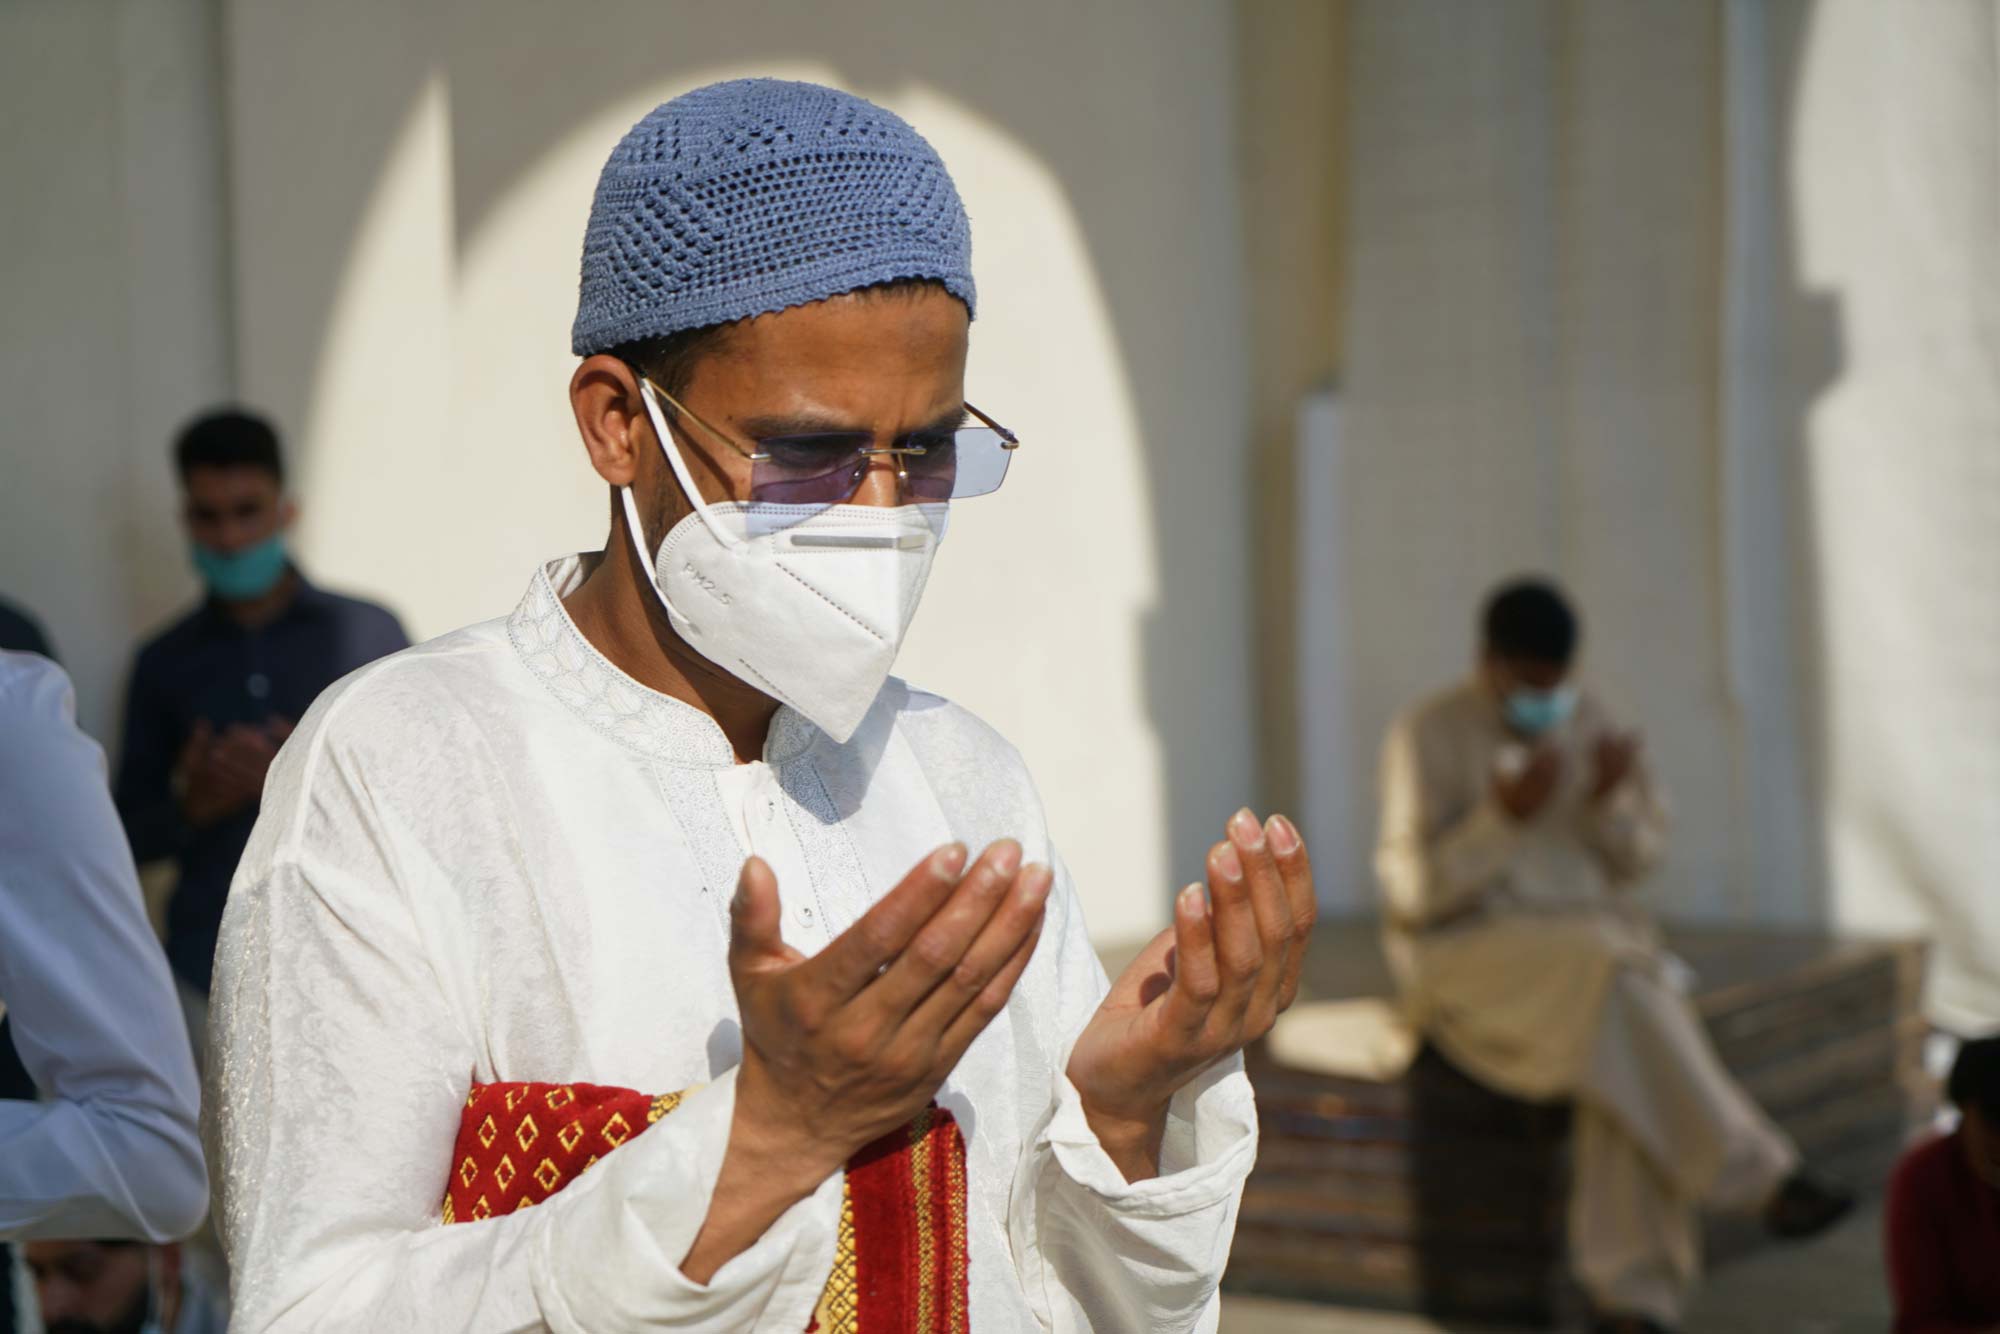 `Eid in Pictures: Muslims Celebrate `Eid Amidst Pandemic - About Islam